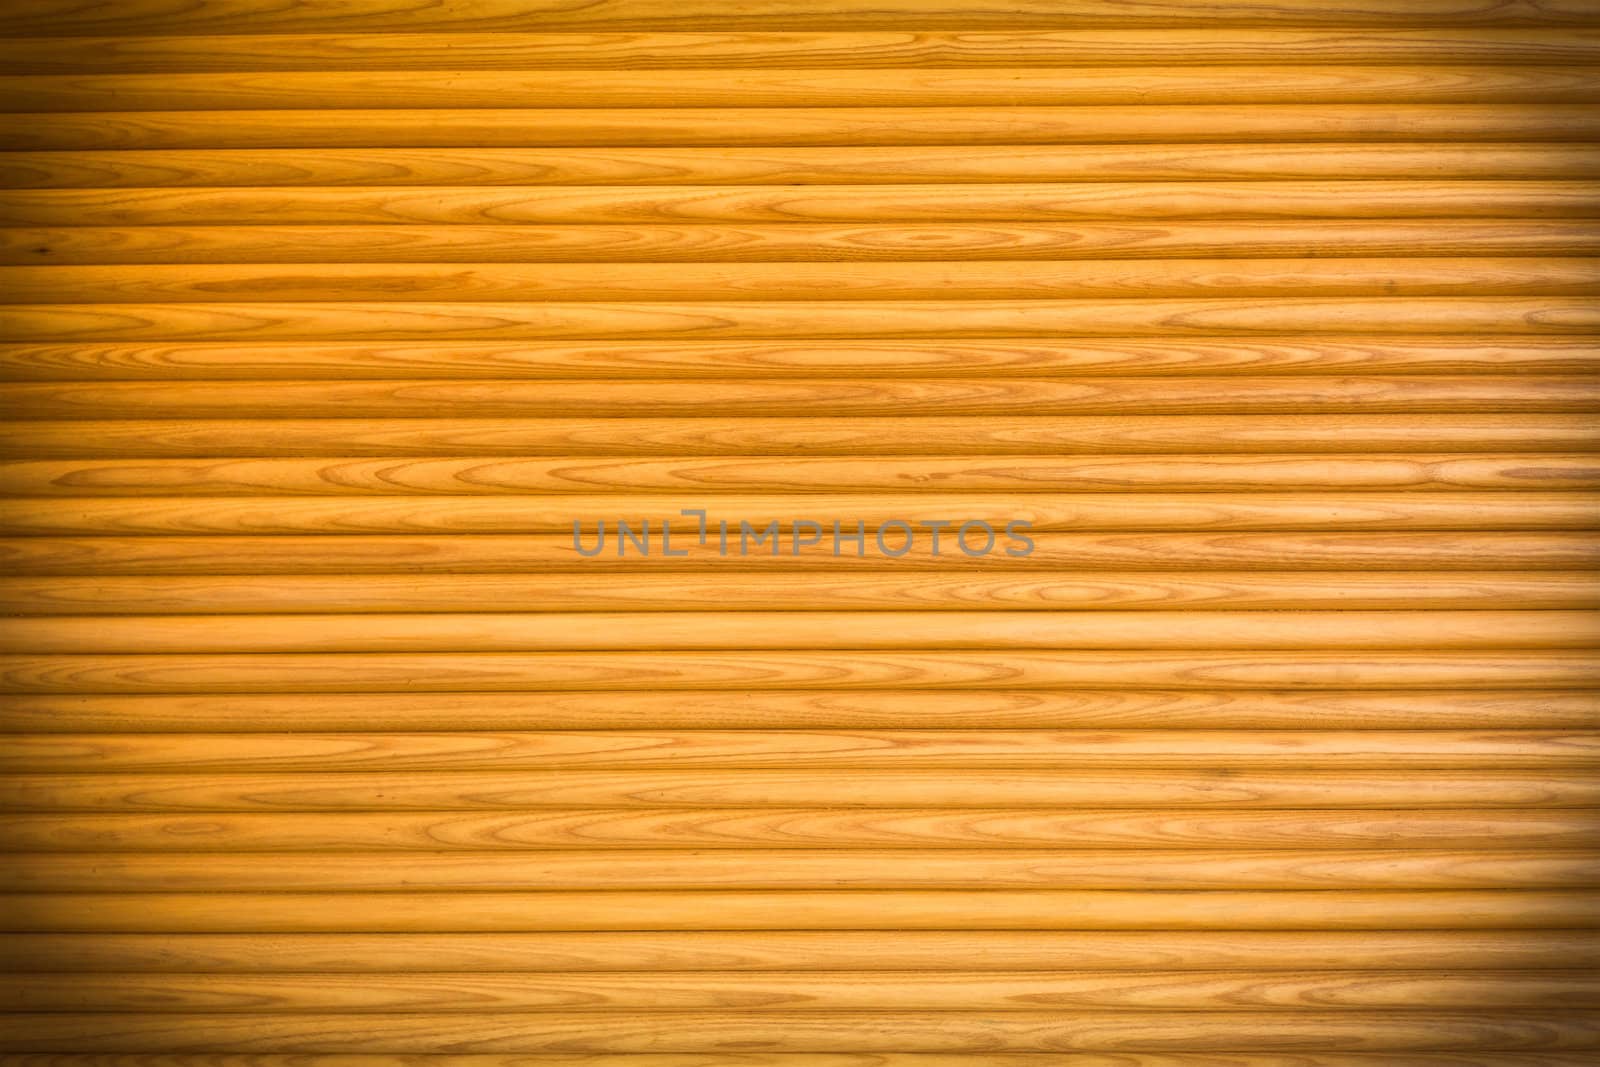 Wood Texture use for background by Suriyaphoto